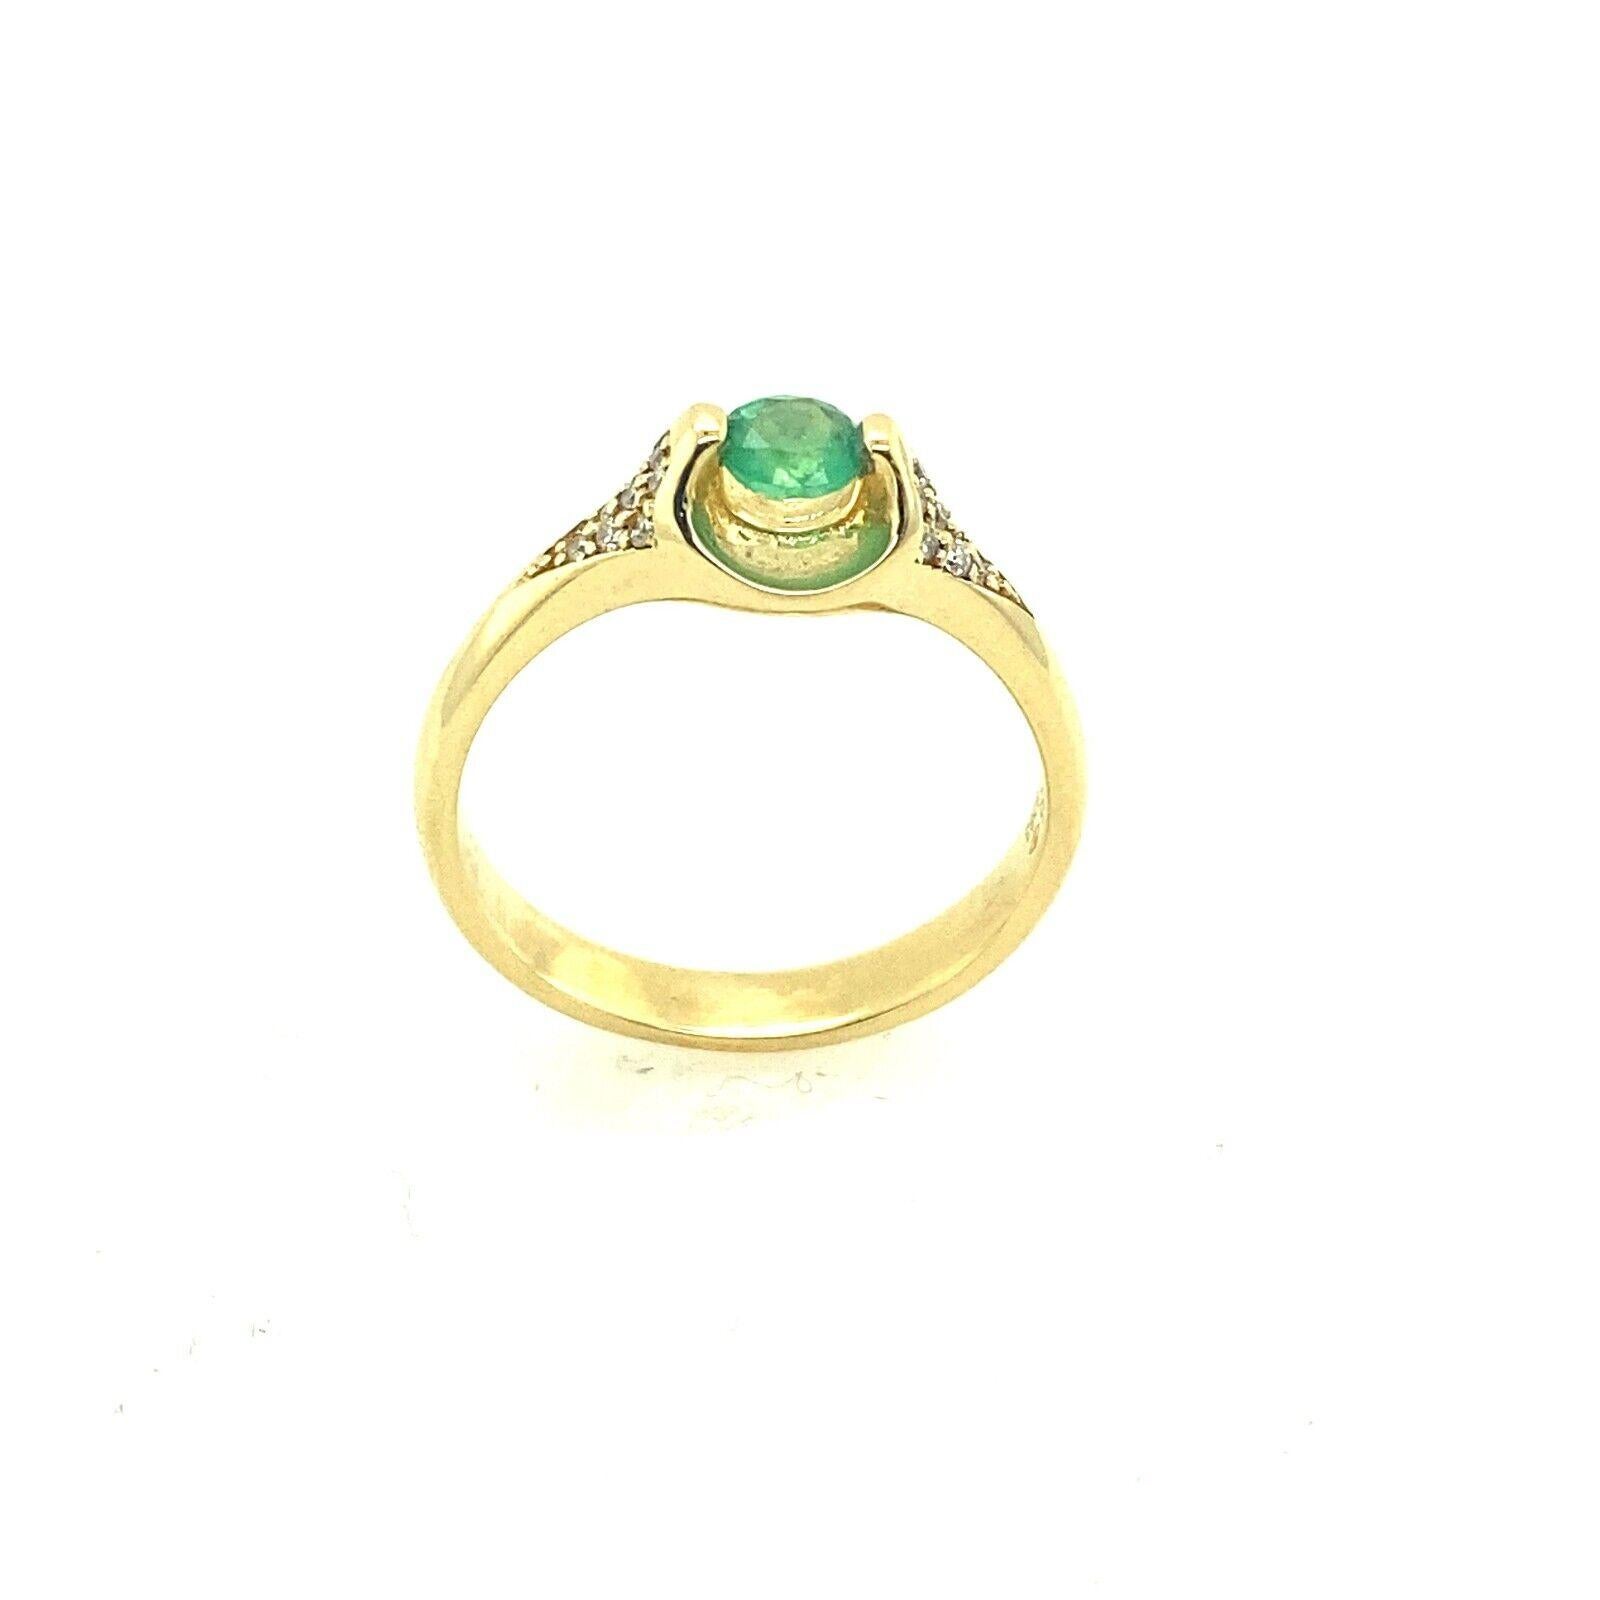 Emerald & Diamond Ring Set with 8 Diamonds on Each Side in 14ct Yellow Gold
This beautiful emerald ring is crafted from 14ct gold and set with a 0.08ct round brilliant cut diamond. This ring is a timeless piece of art that will compliment any